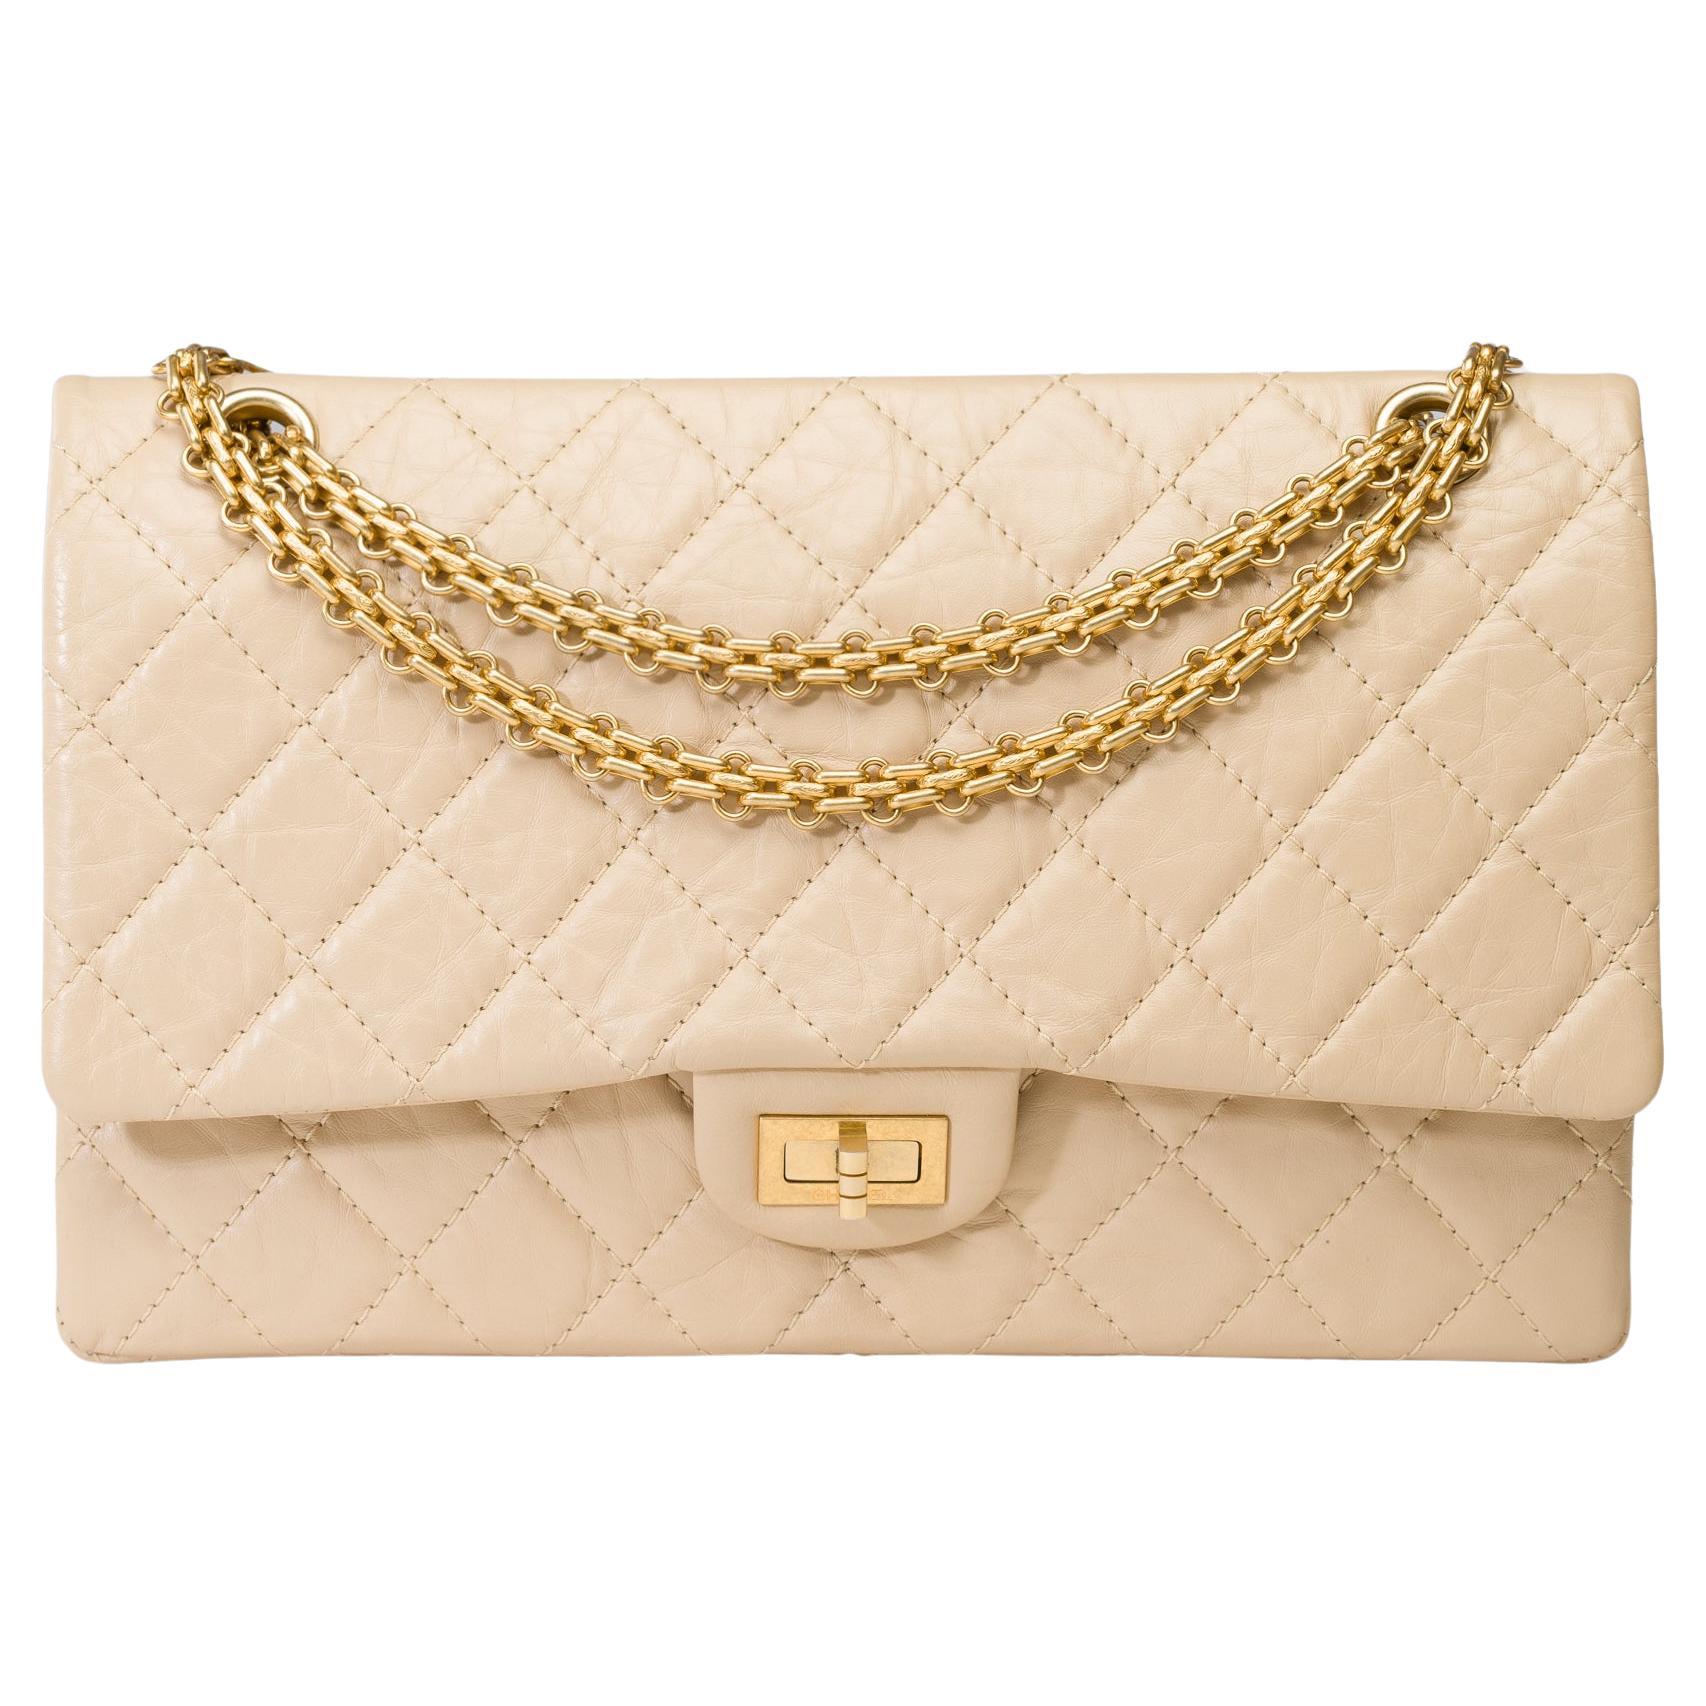 Iconic Chanel 2.55 double flap shoulder bag in quilted beige leather, GHW For Sale